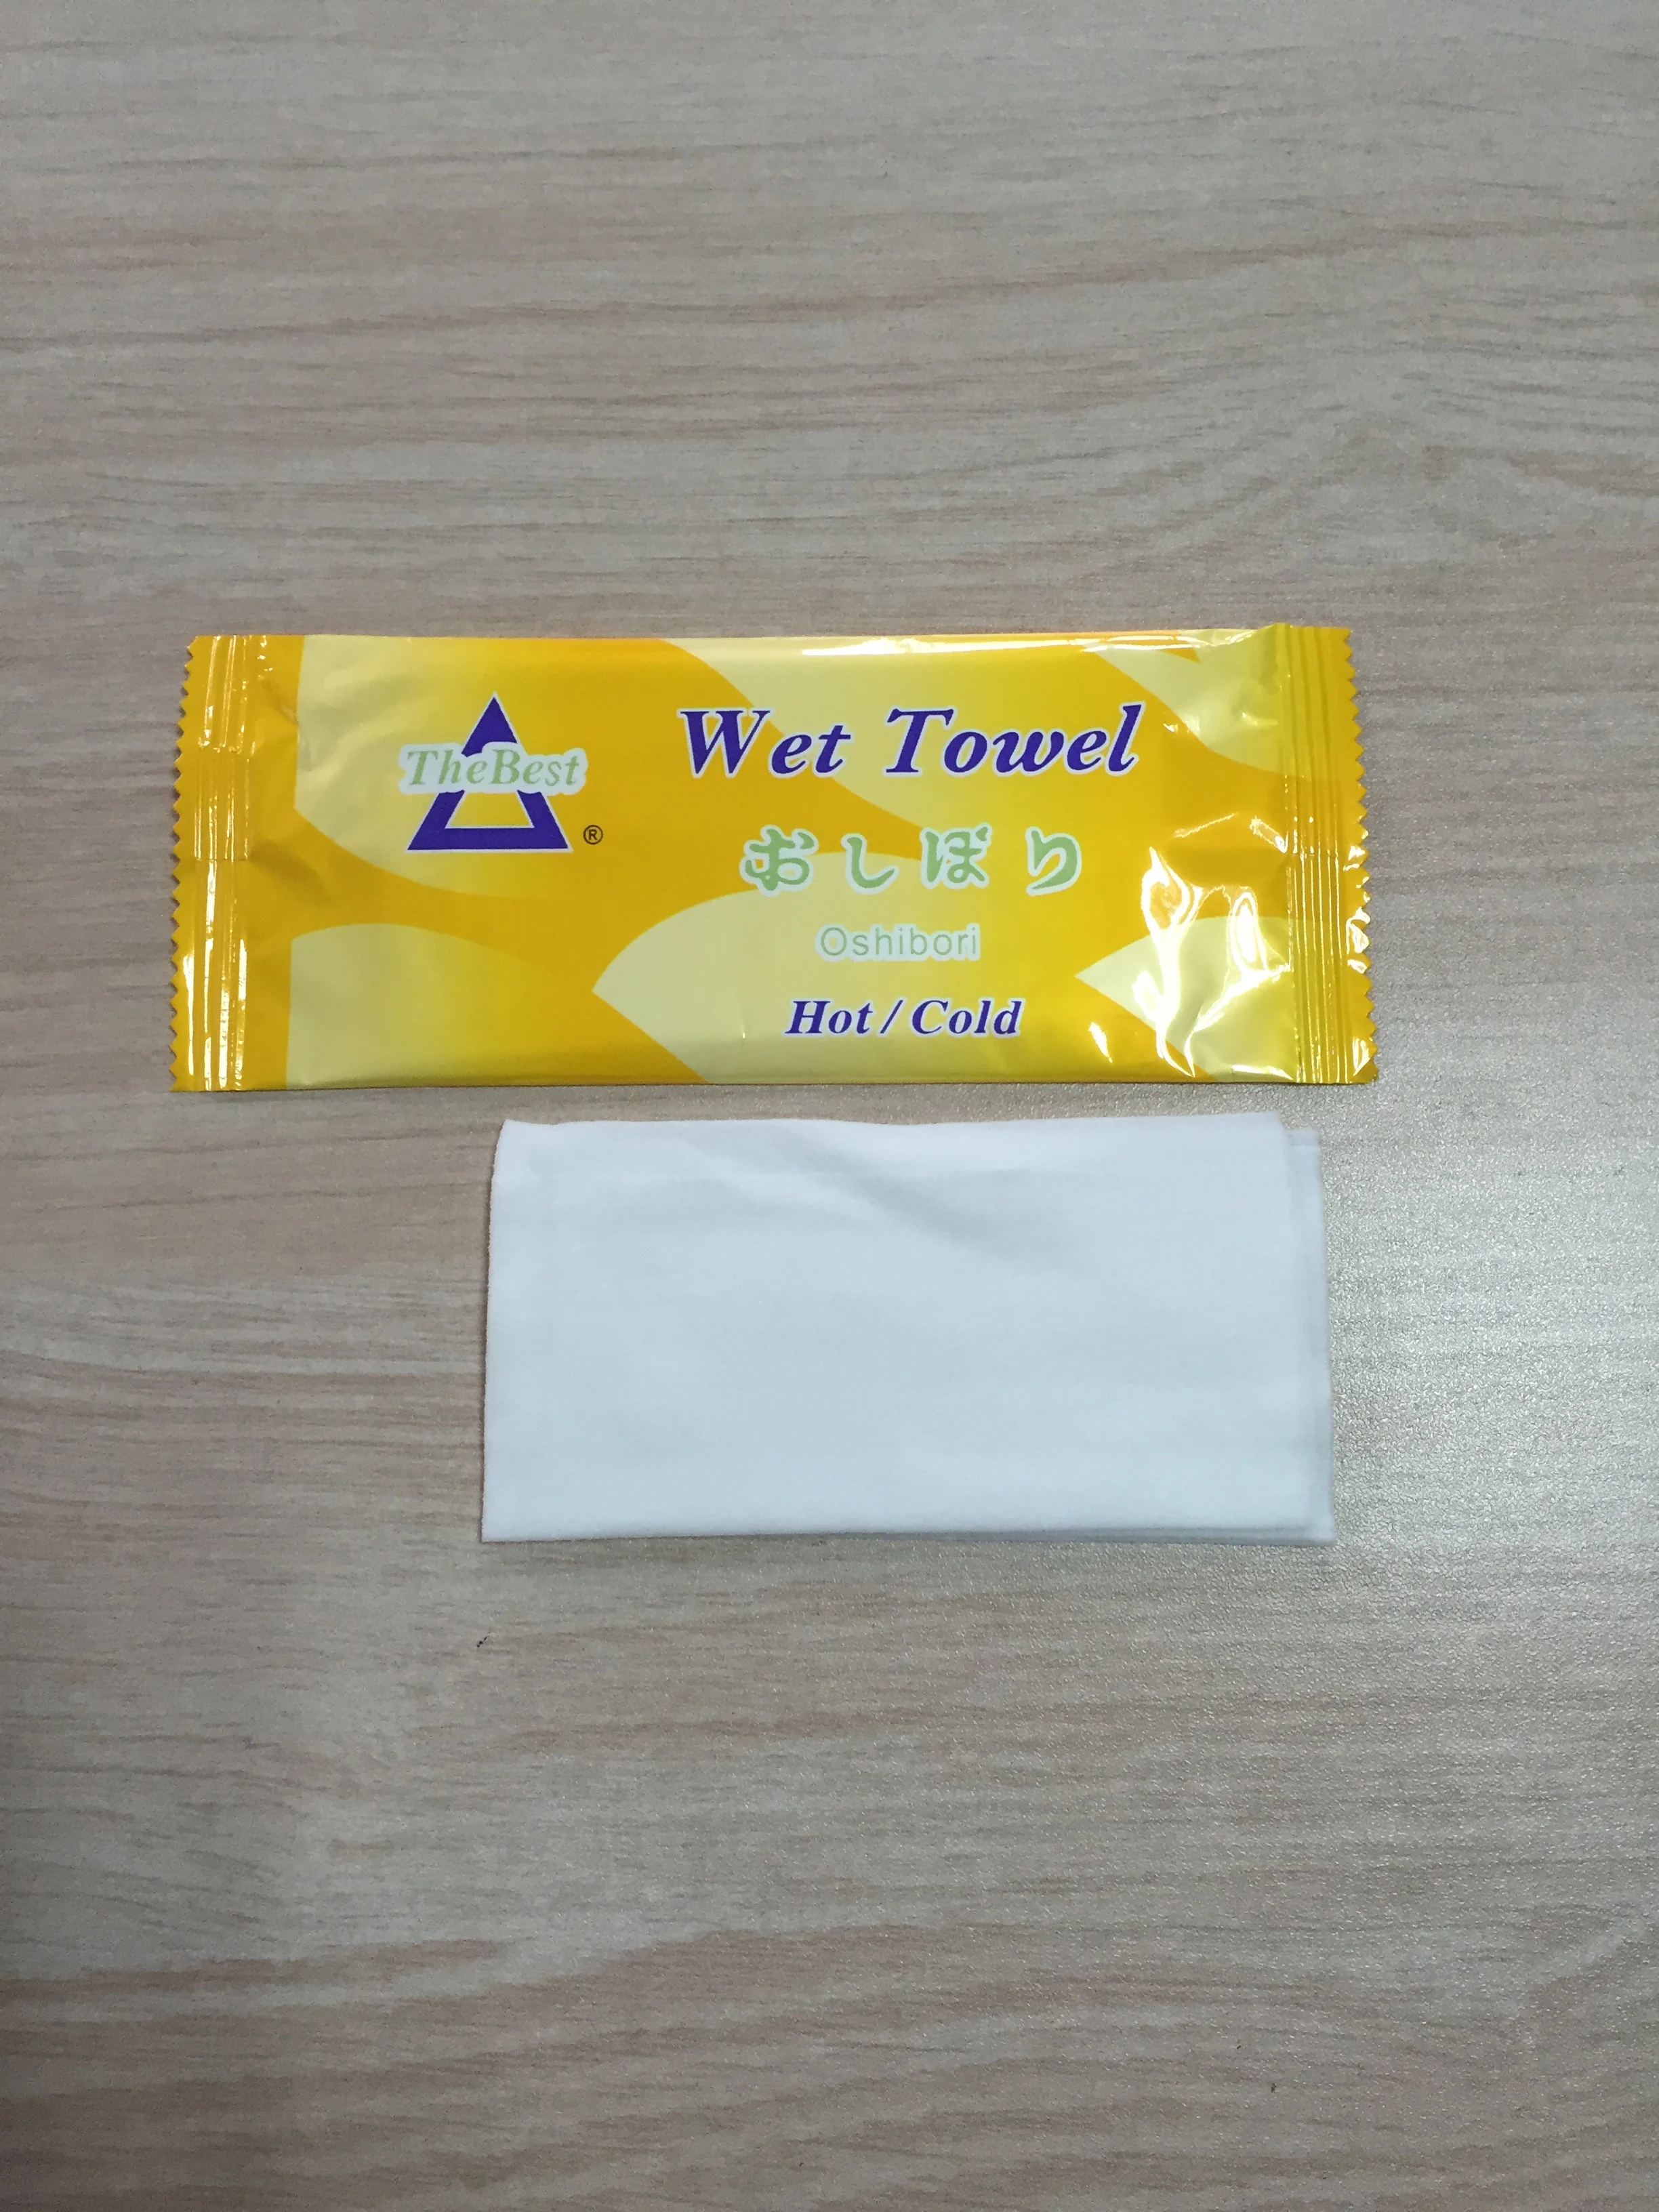 Restaurant and Hotel Use individual packing wet wipe  distributors wanted